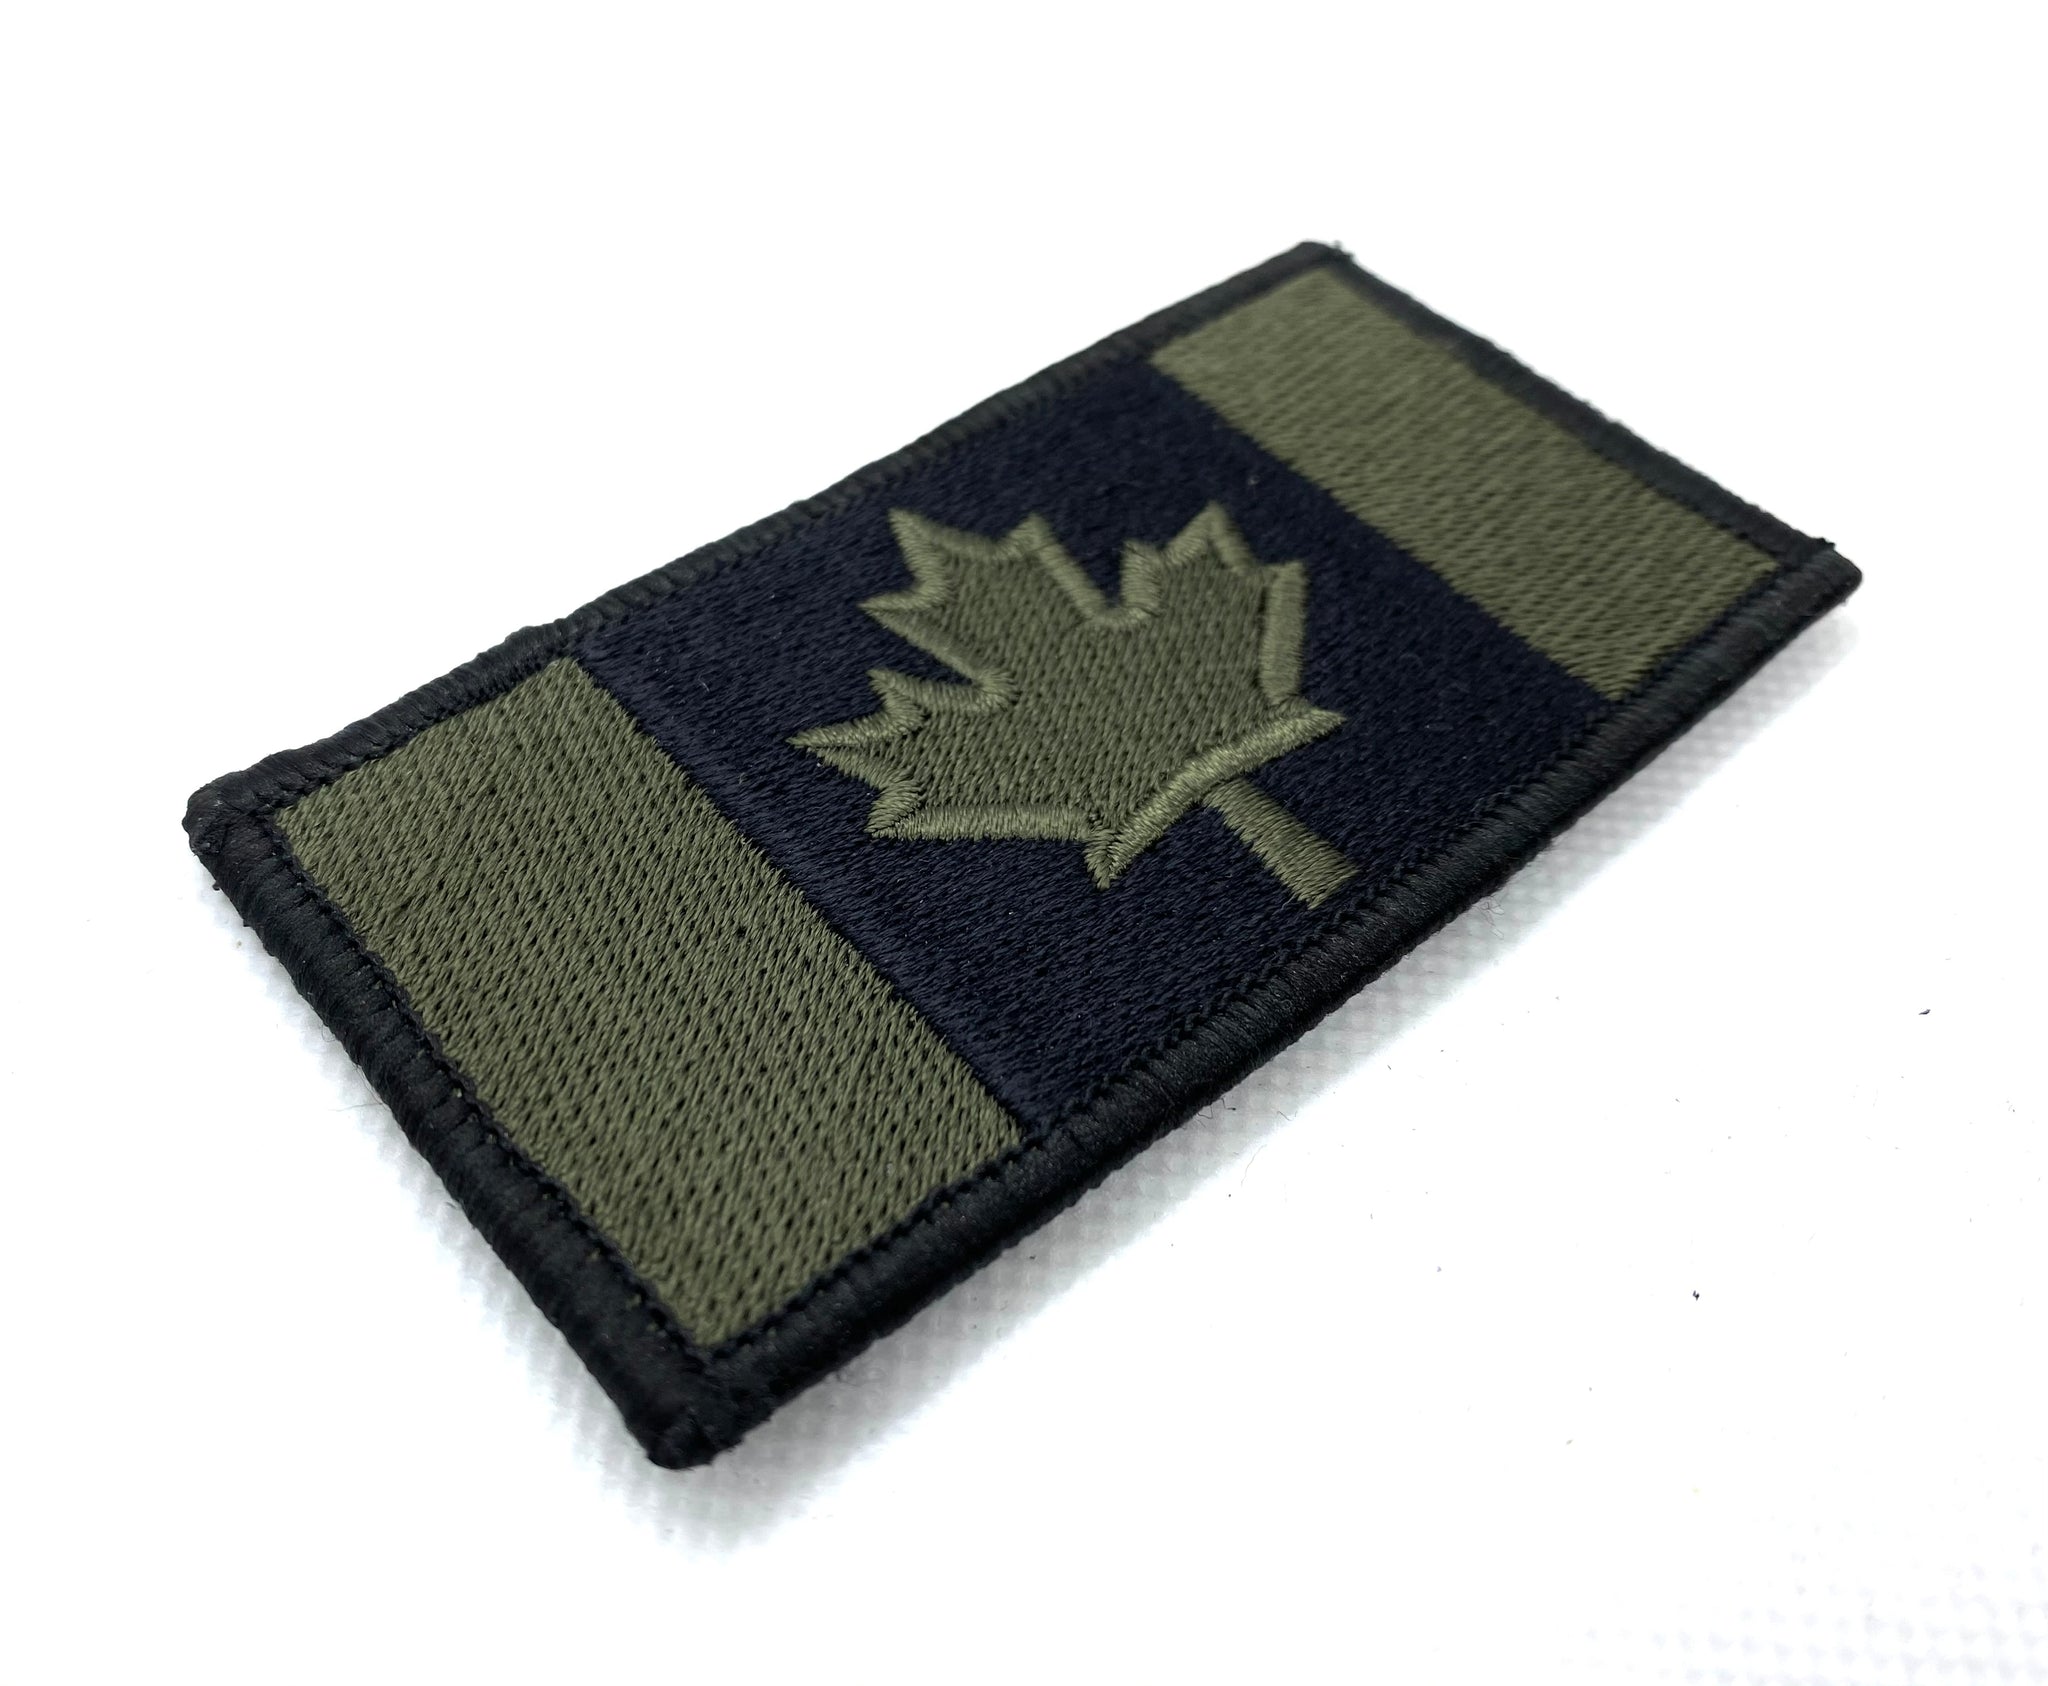 Canada Flag 'I Love CA' Embroidered Velcro Patch — Little Patch Co